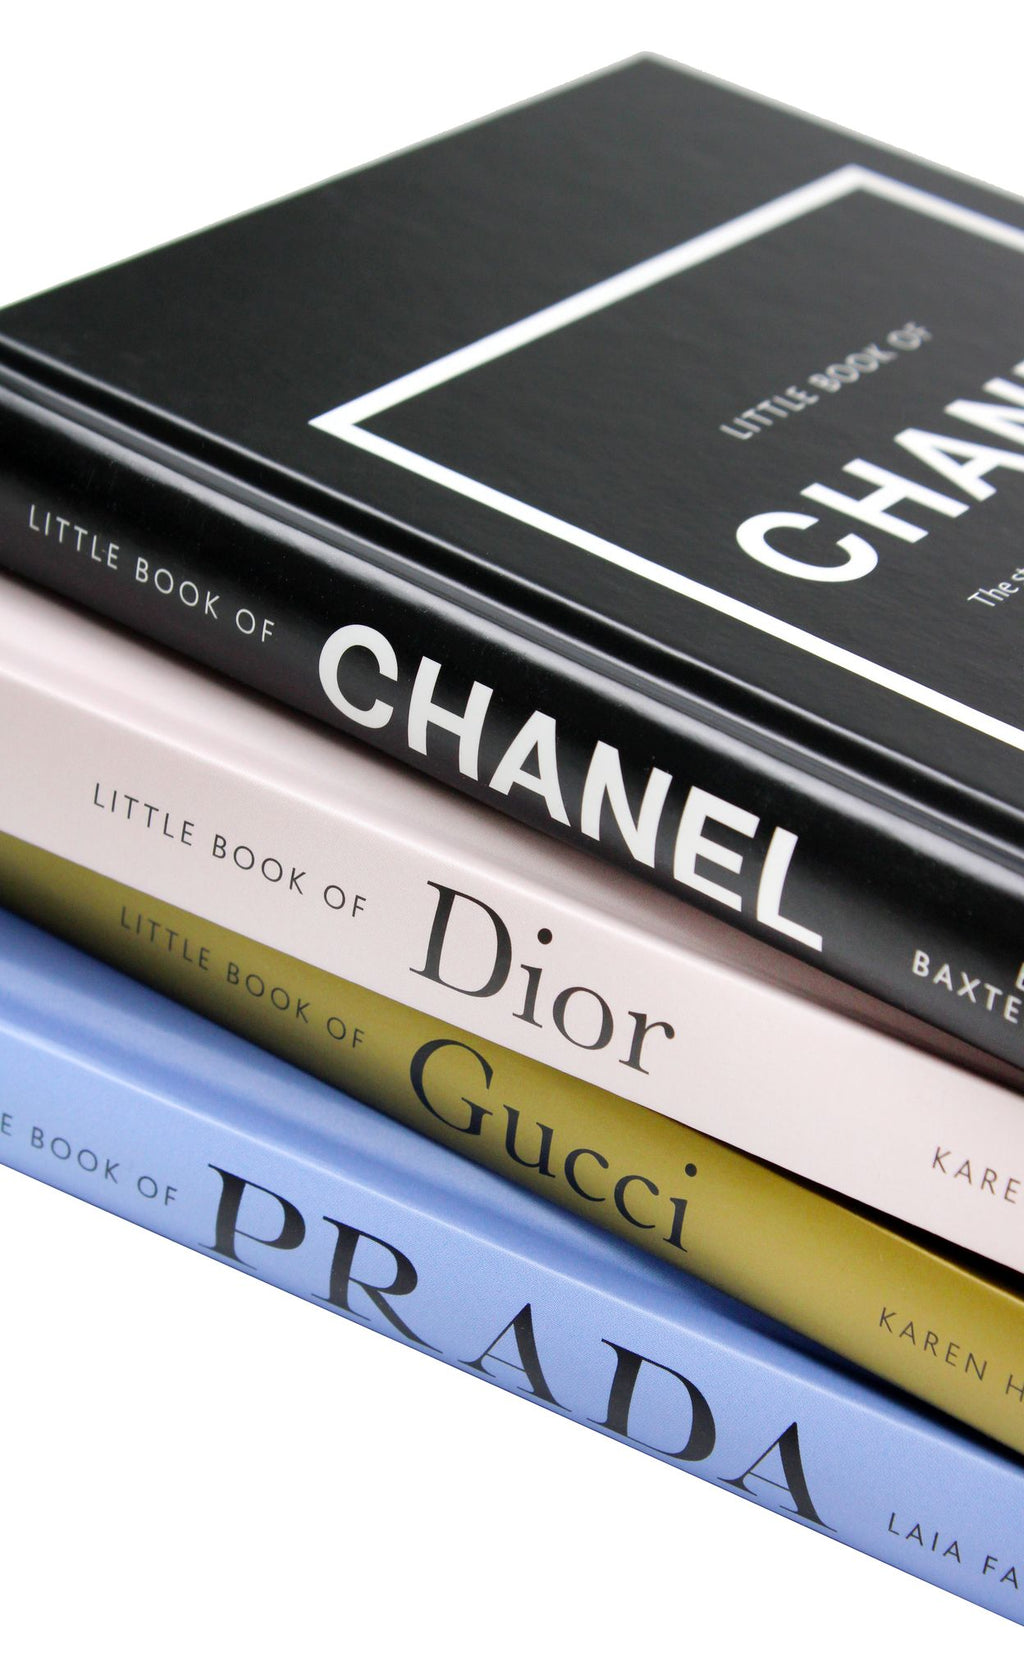 Little Guides to Style: The Story of Four Iconic Fashion Houses, Prada, Chanel, Dior